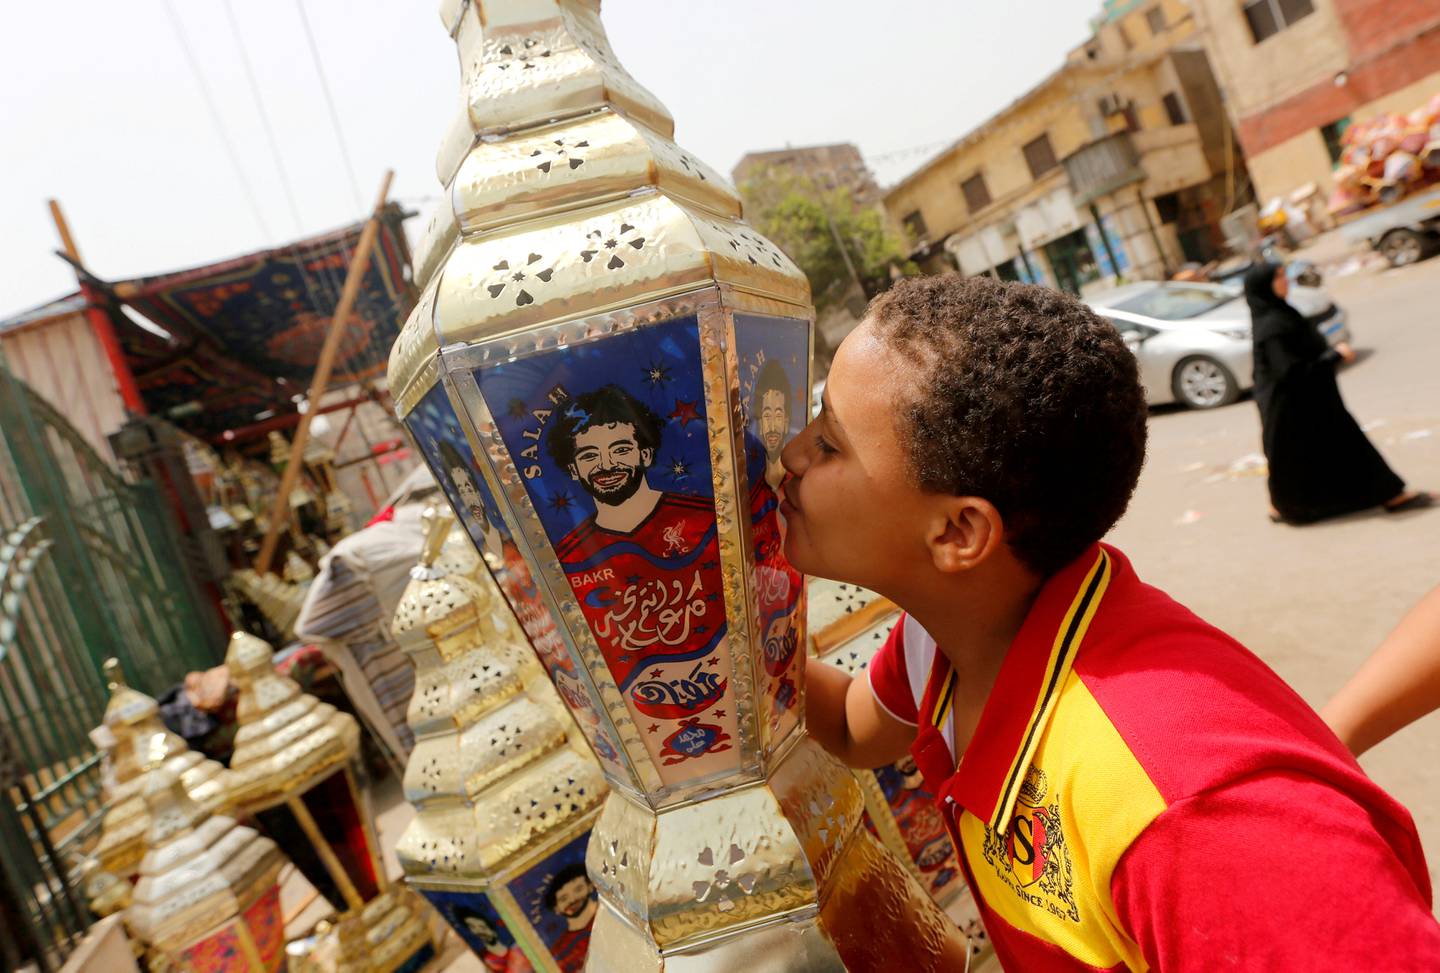 REFILE - ADDING RESTRICTIONS An Egyptian boy kisses the traditional decorative lanterns known as